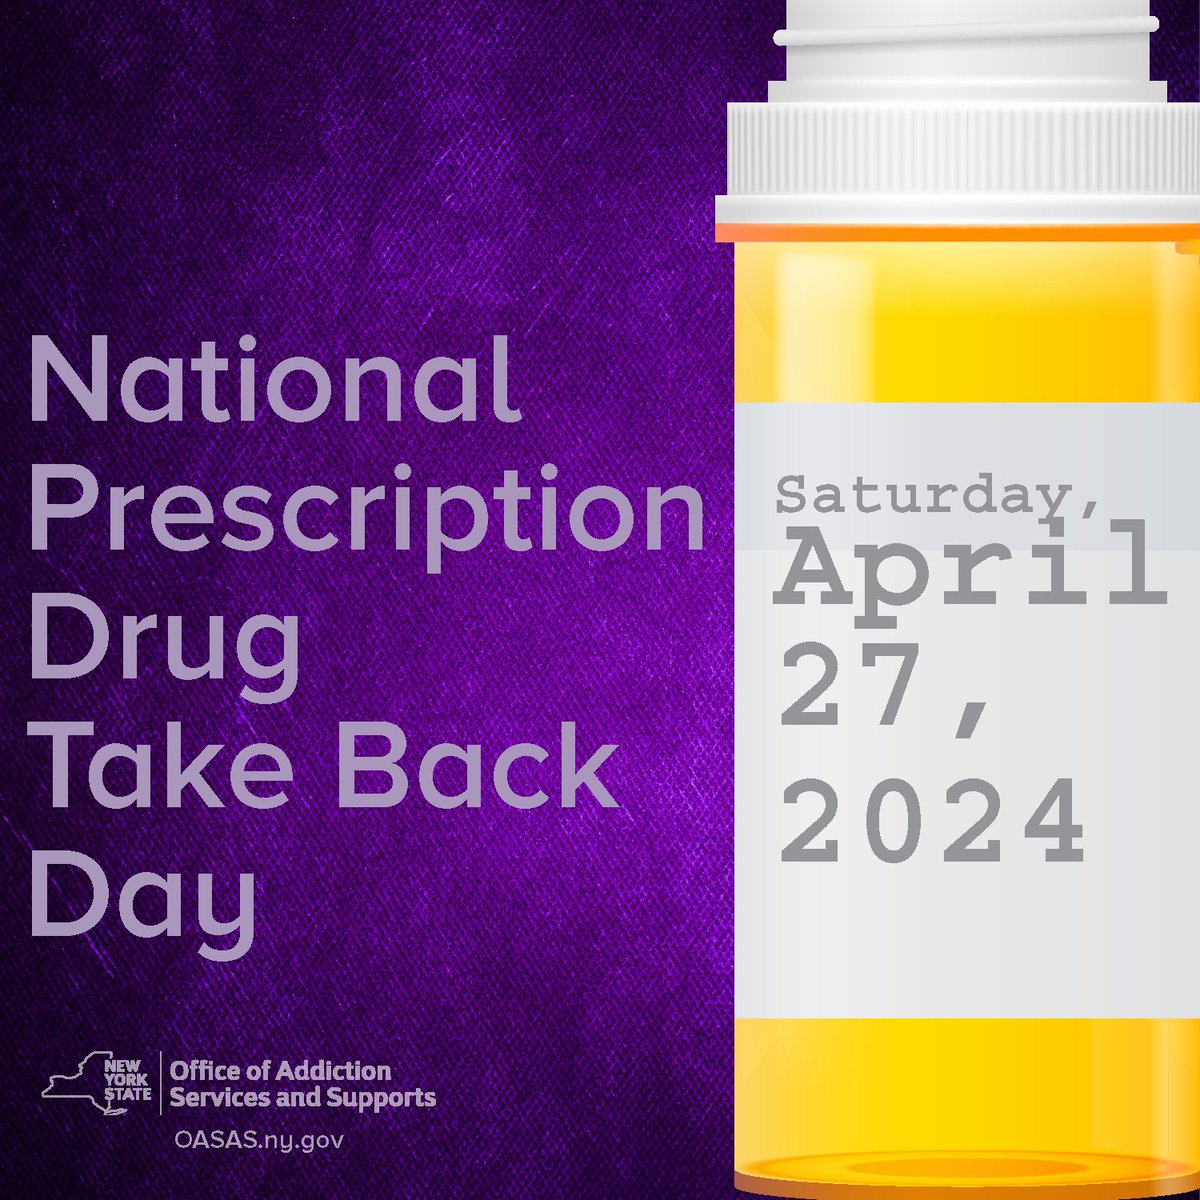 Don't forget that National Prescription Drug Take Back Day is TOMORROW, April 27, from 10 a.m. to 2 p.m. Watch @DrChinazoOASAS's video message and get all the details on our website. ➡ oasas.ny.gov/event/national…